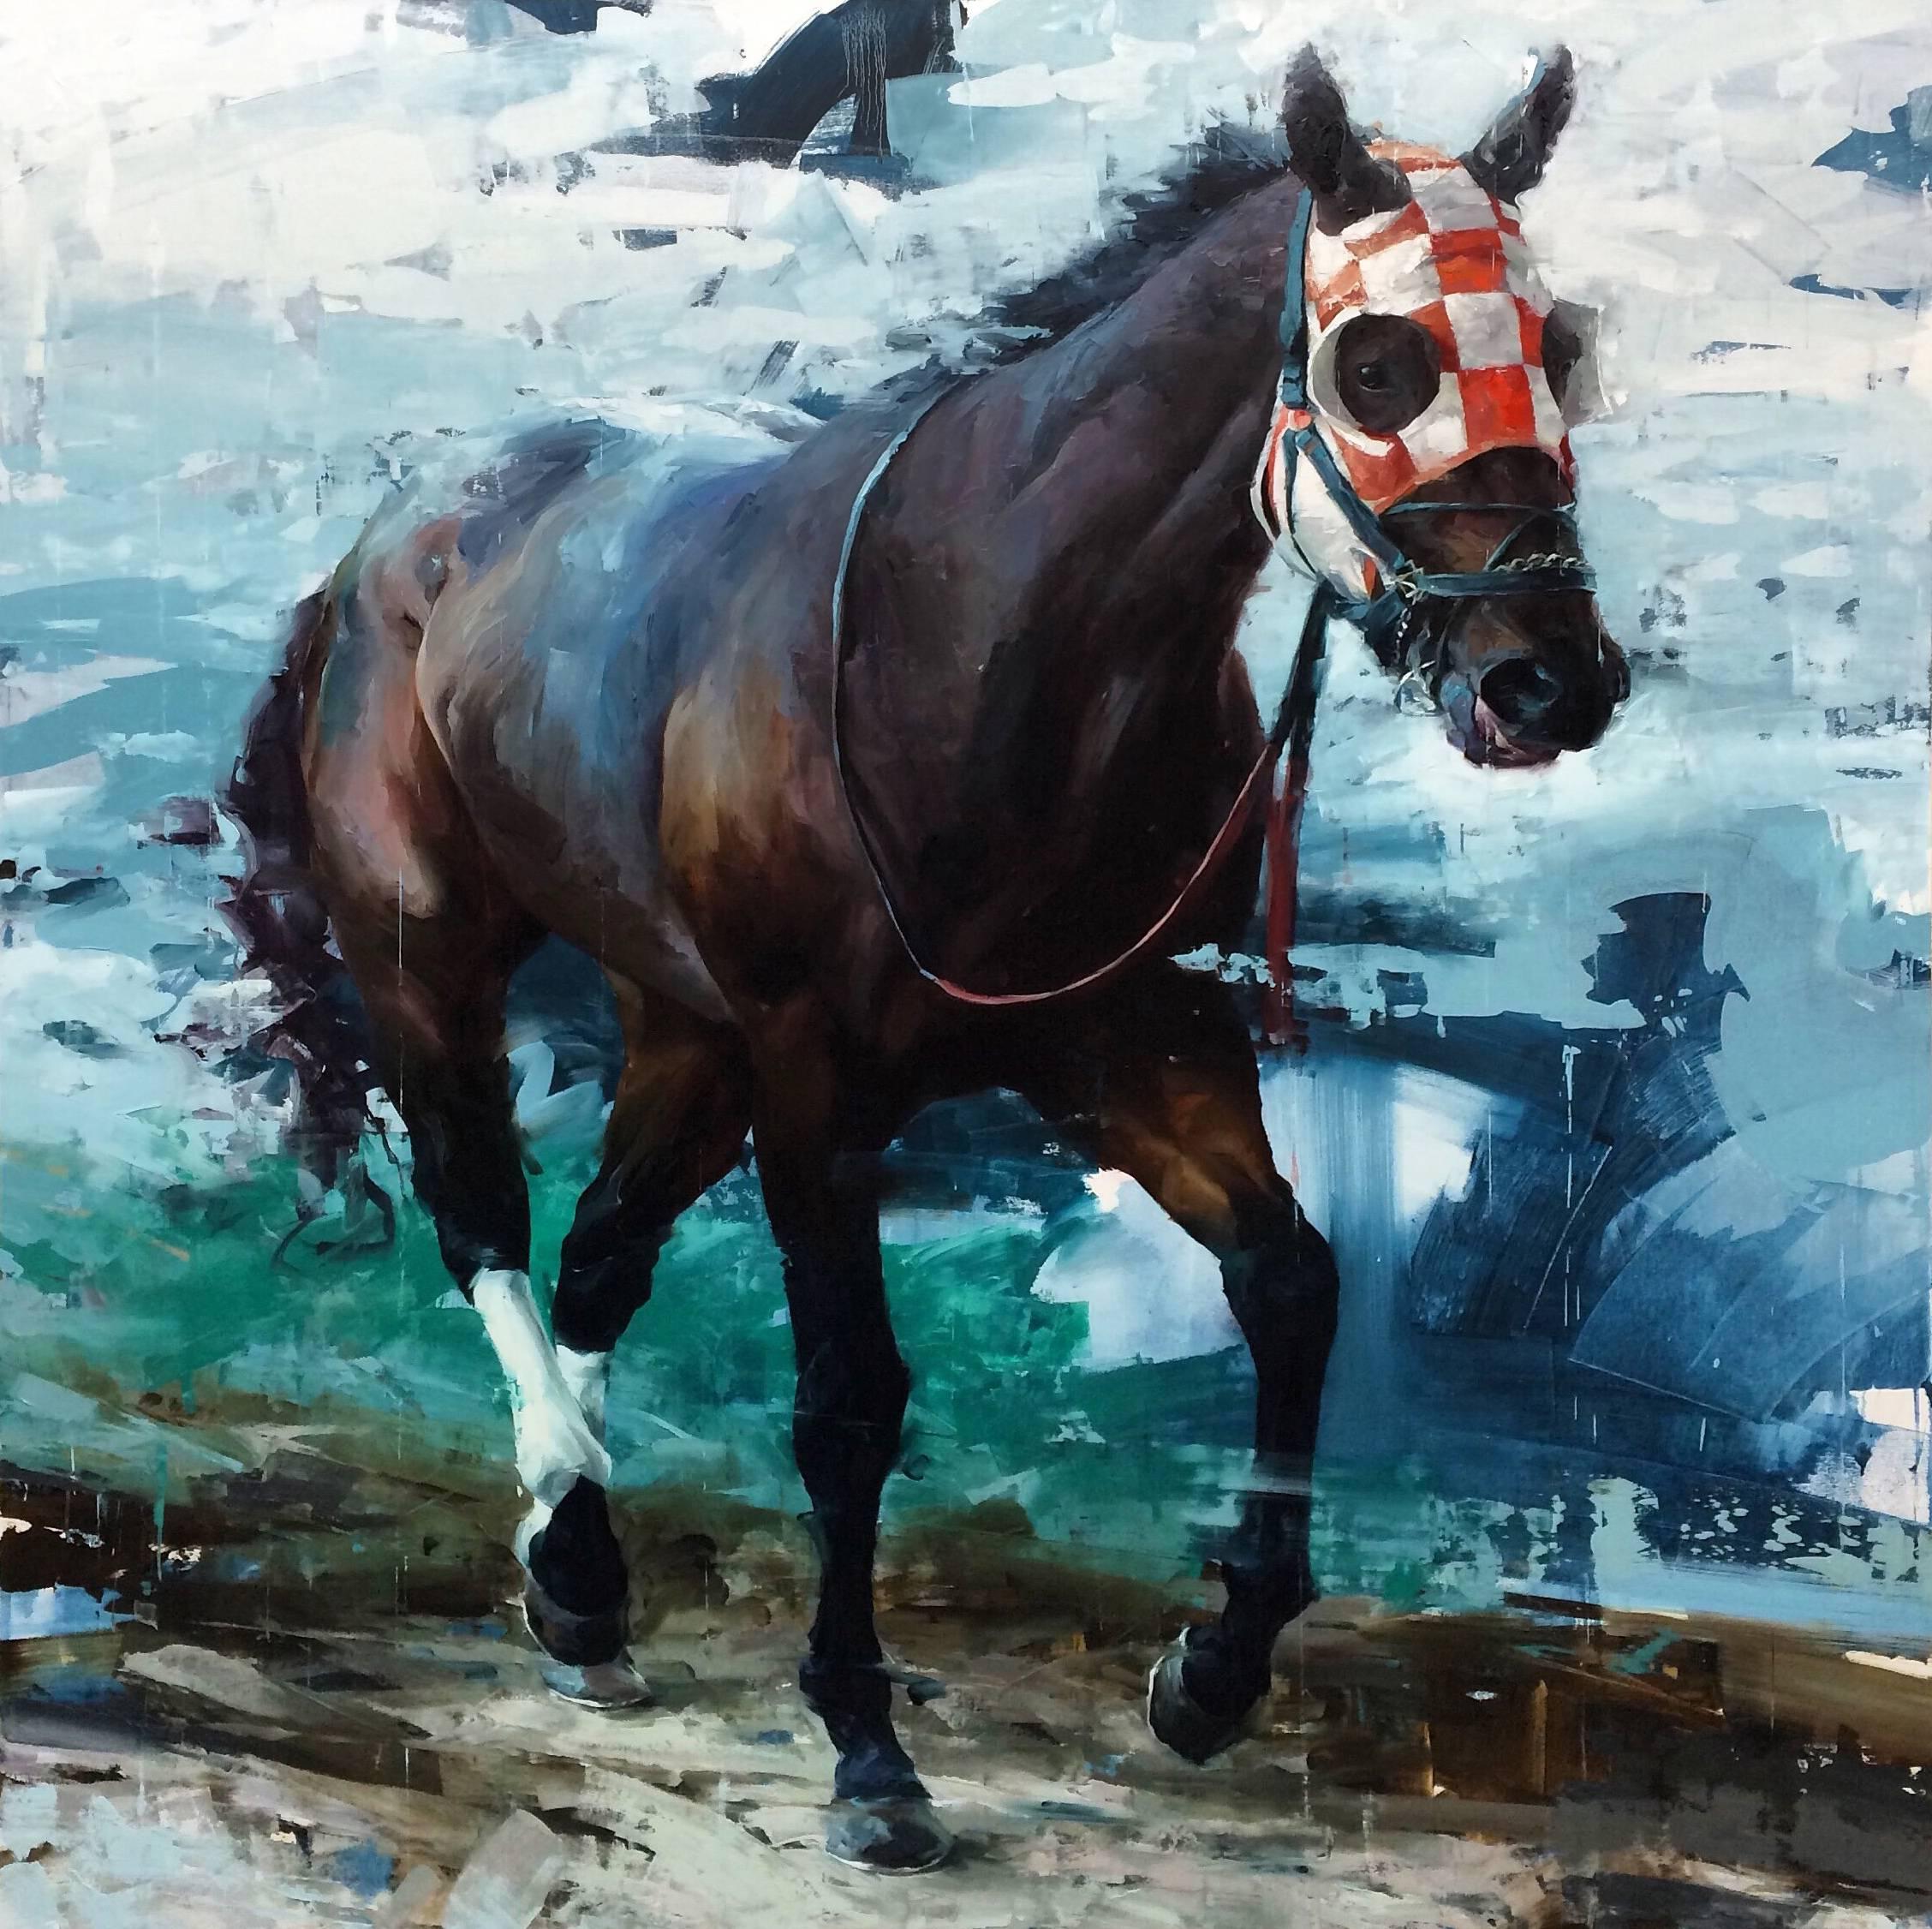 Original oil painting from Aron Belka's 2018 exhibition "Call to Post". "Call to Post" explores the topic of horses, a subject matter that first appeared in prehistoric cave paintings almost 16,000 years ago. This exhibit is his contemporary take on